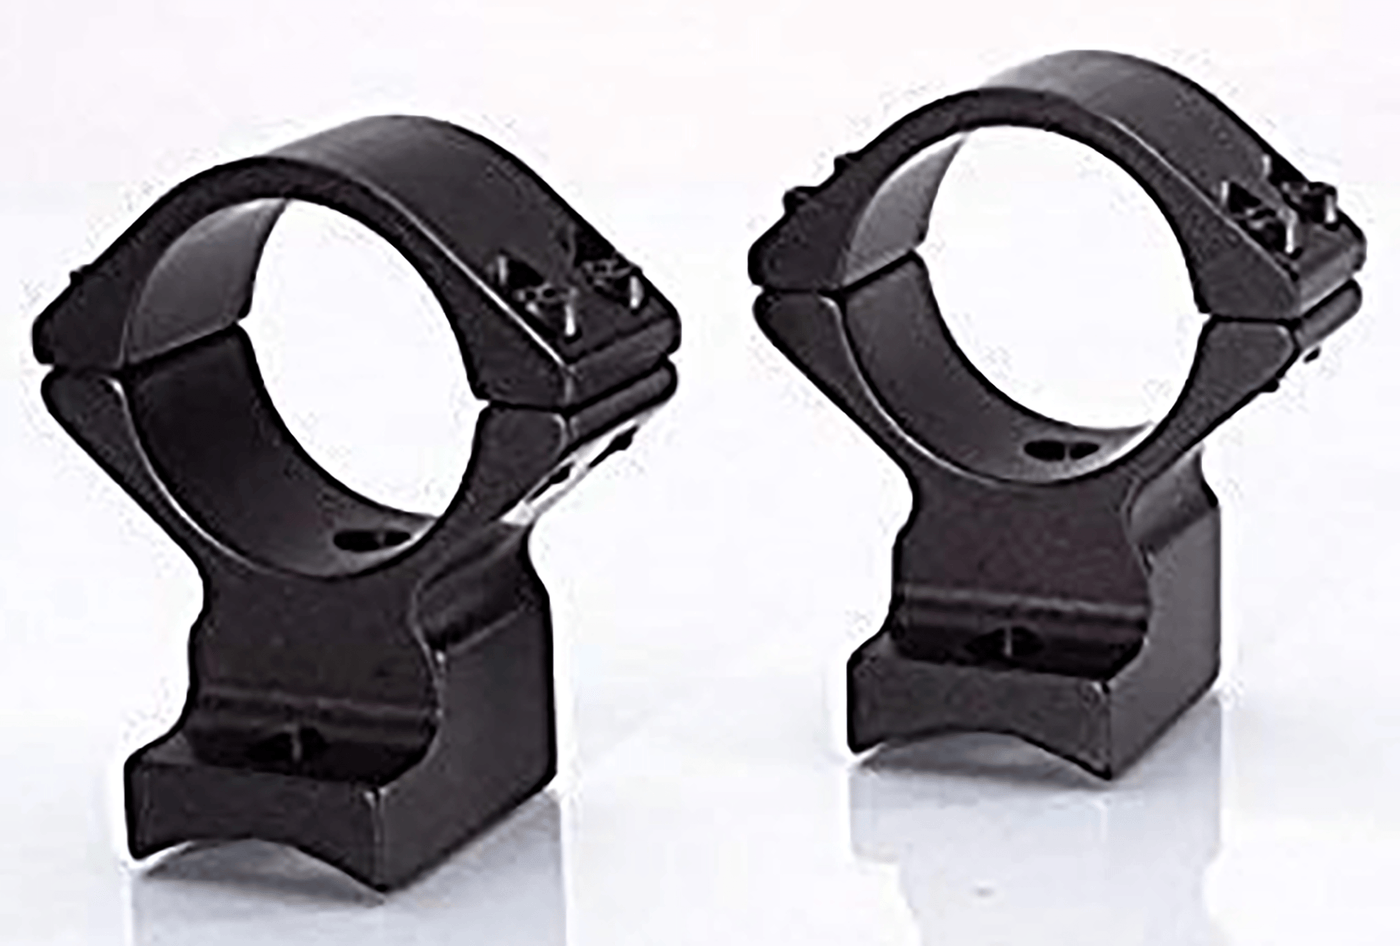 Talley Talley Scope Ring Set, Tal 740709    30mm 98 Mauser Lg Ring**mauser M12 Optics Accessories